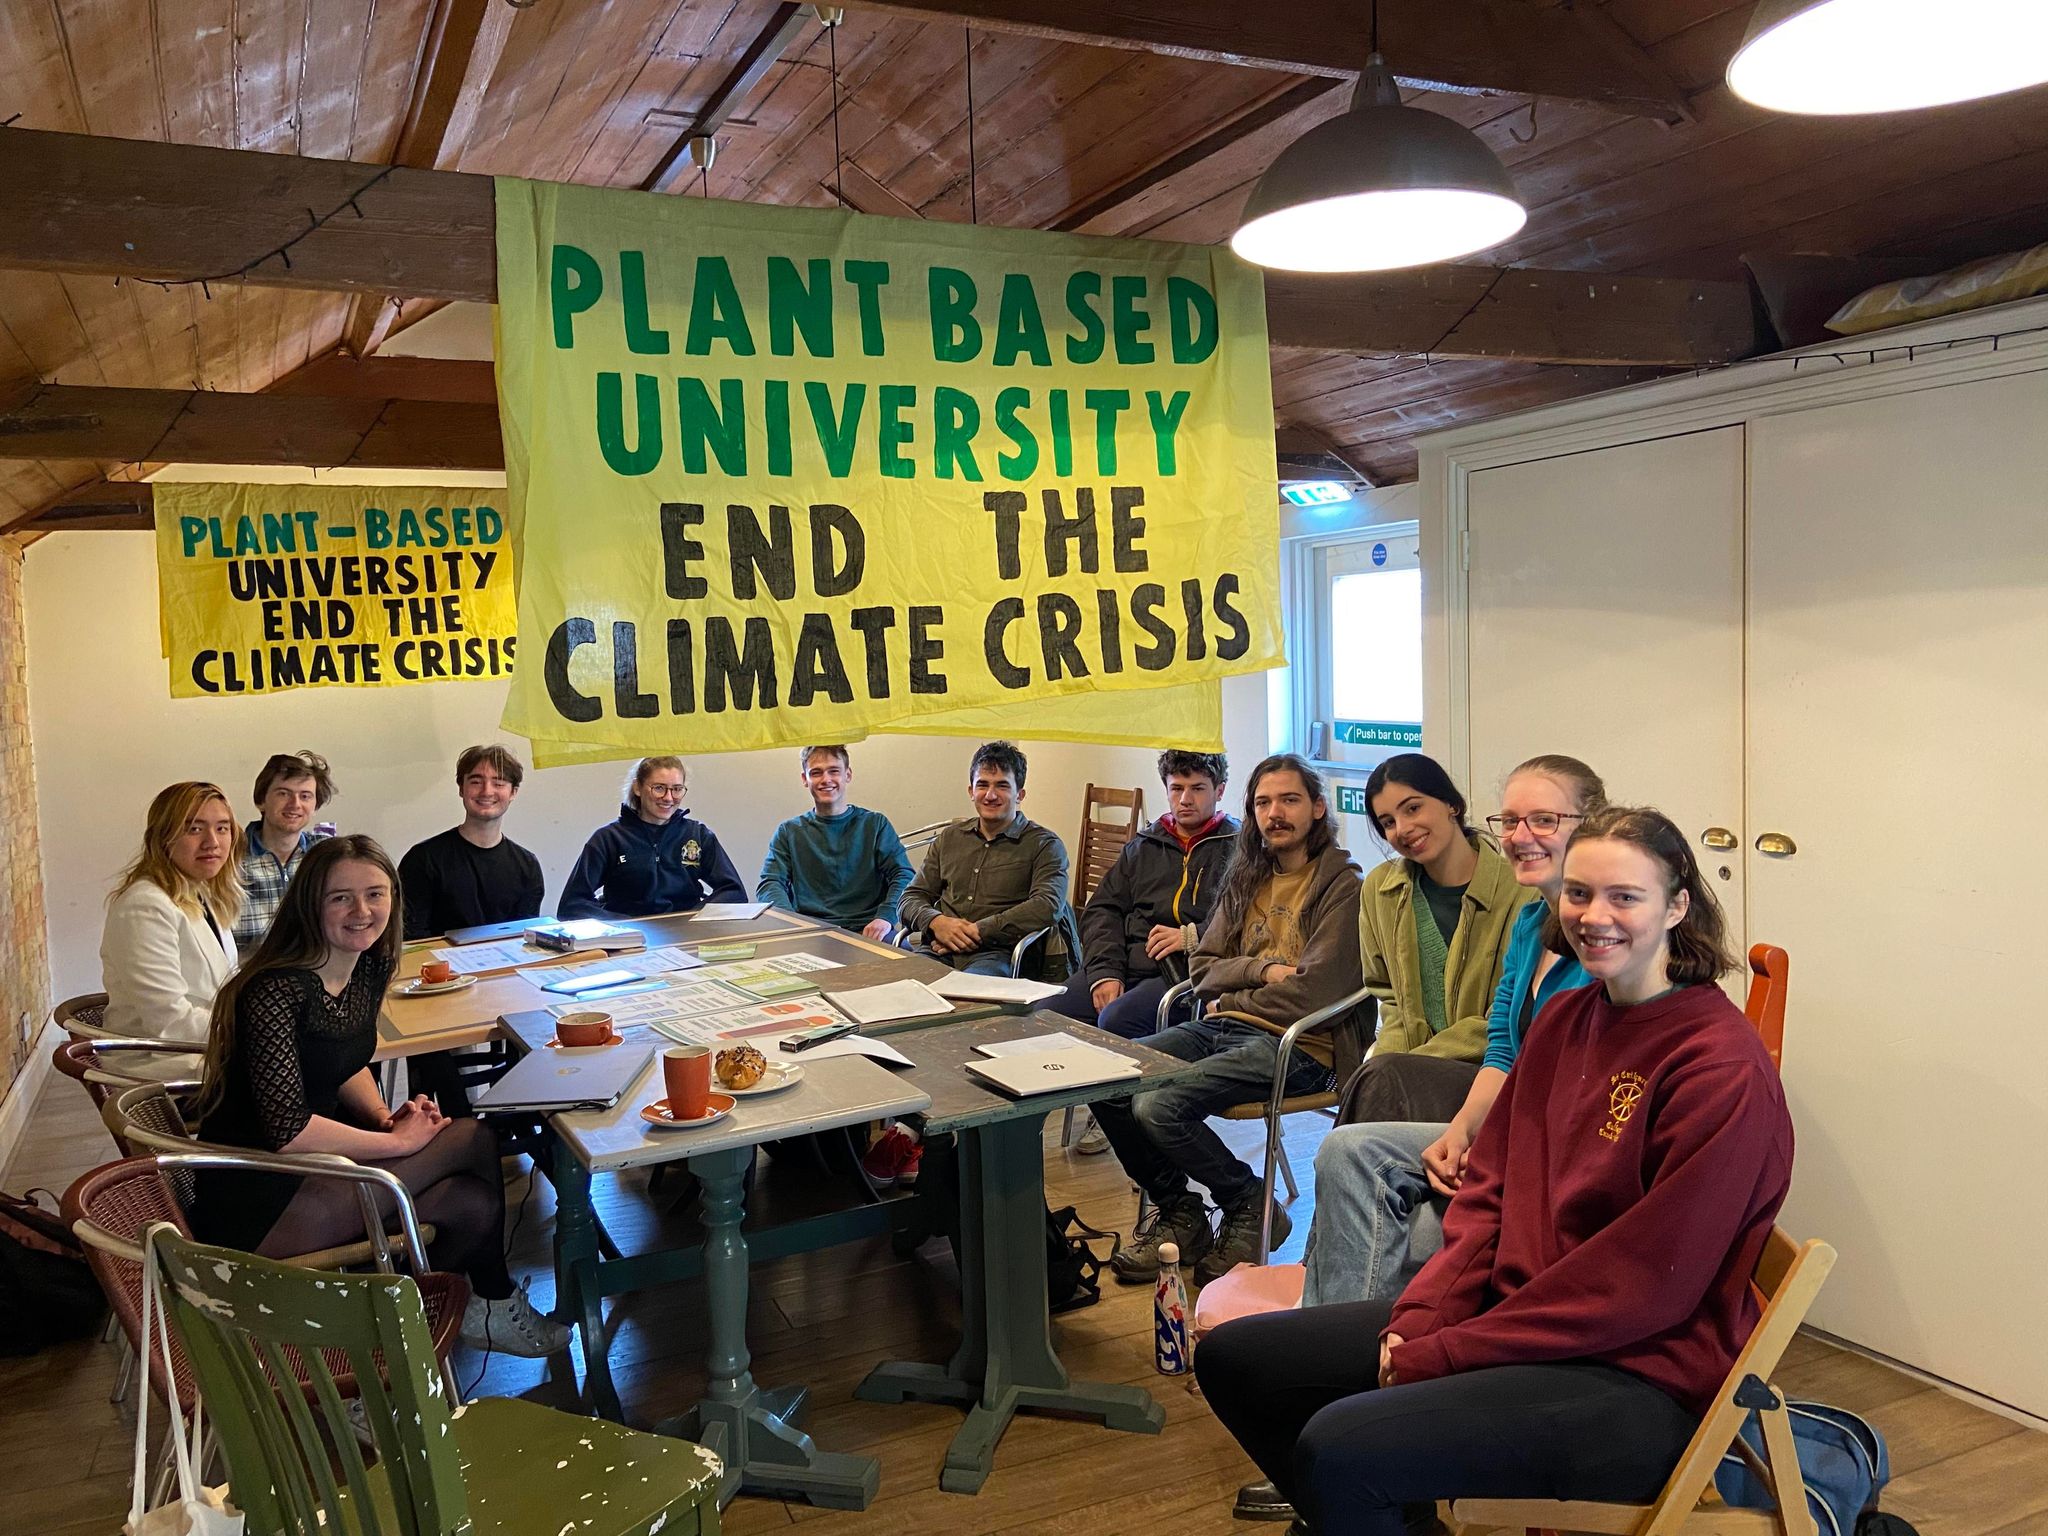 Plant Based Colleges Campaign Training @ Thrive – photocredit: Rosie Lester